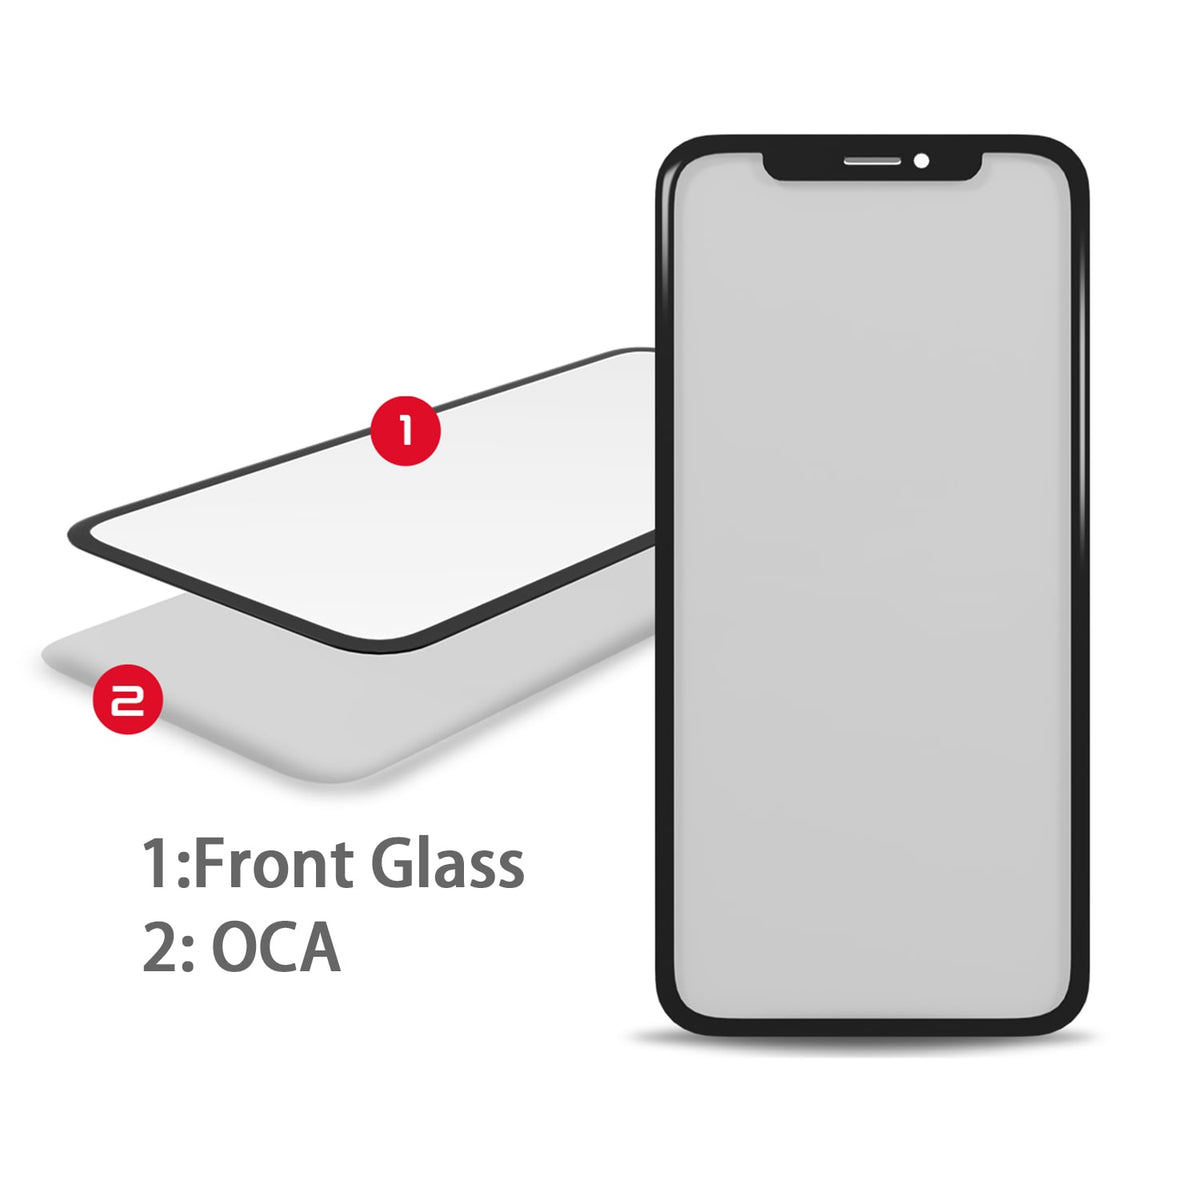 FRONT GLASS WITH OCA PREINSTALLED FOR IPHONE 12 PRO MAX / 12 PRO / 12